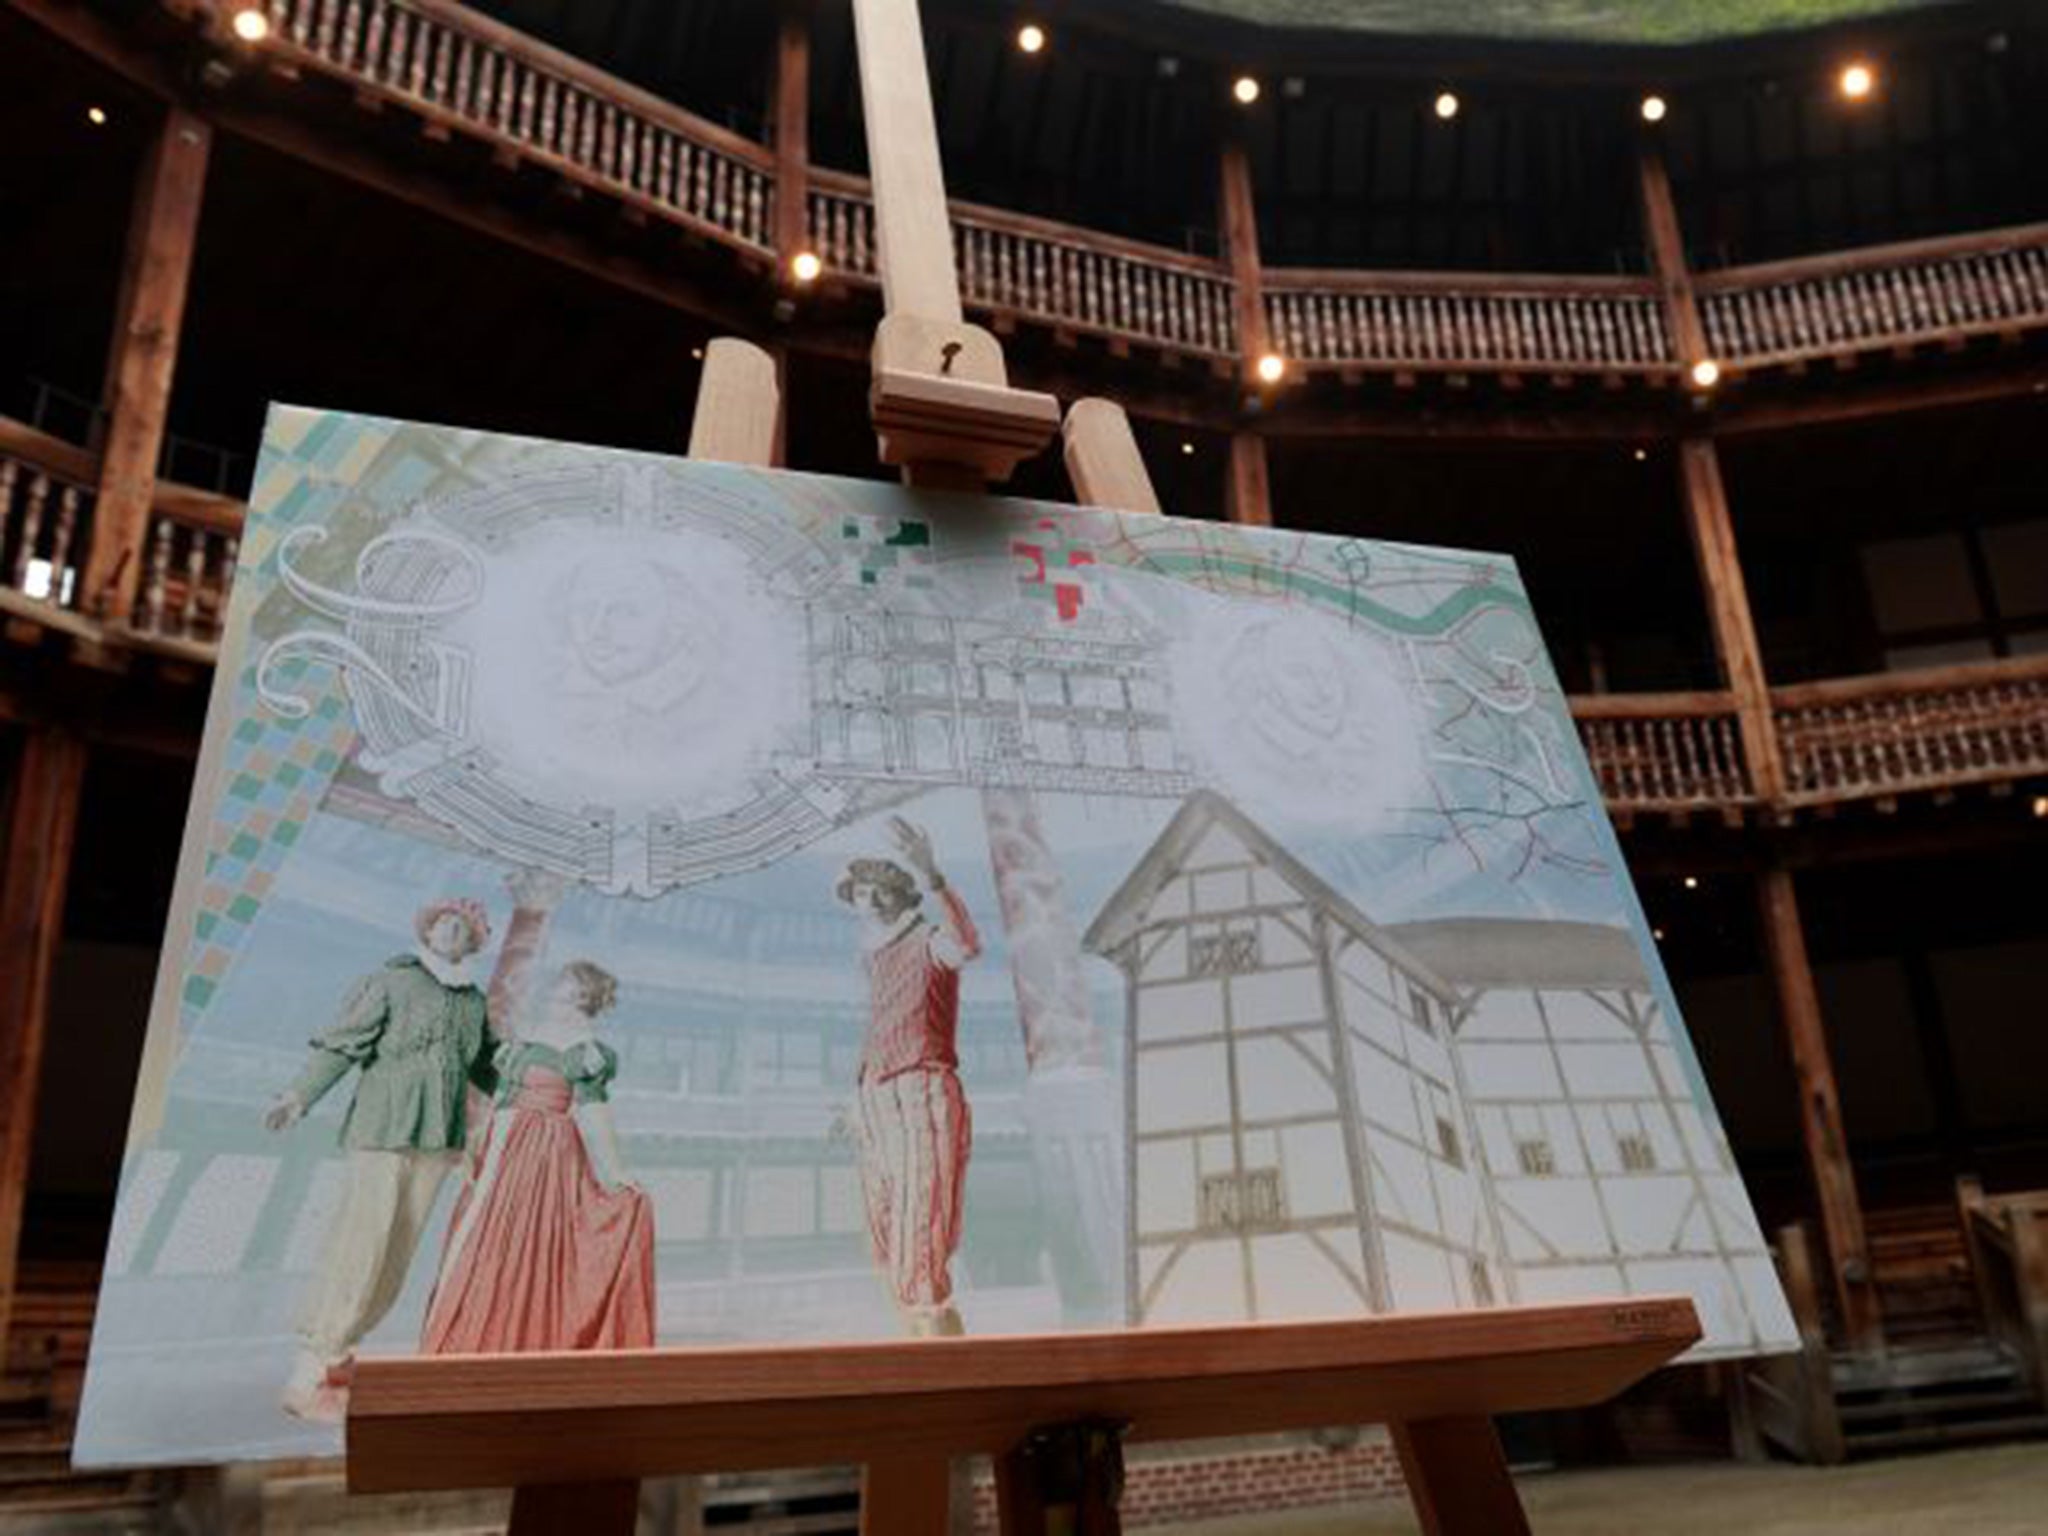 The new design was unveiled in Shakespeare's Globe